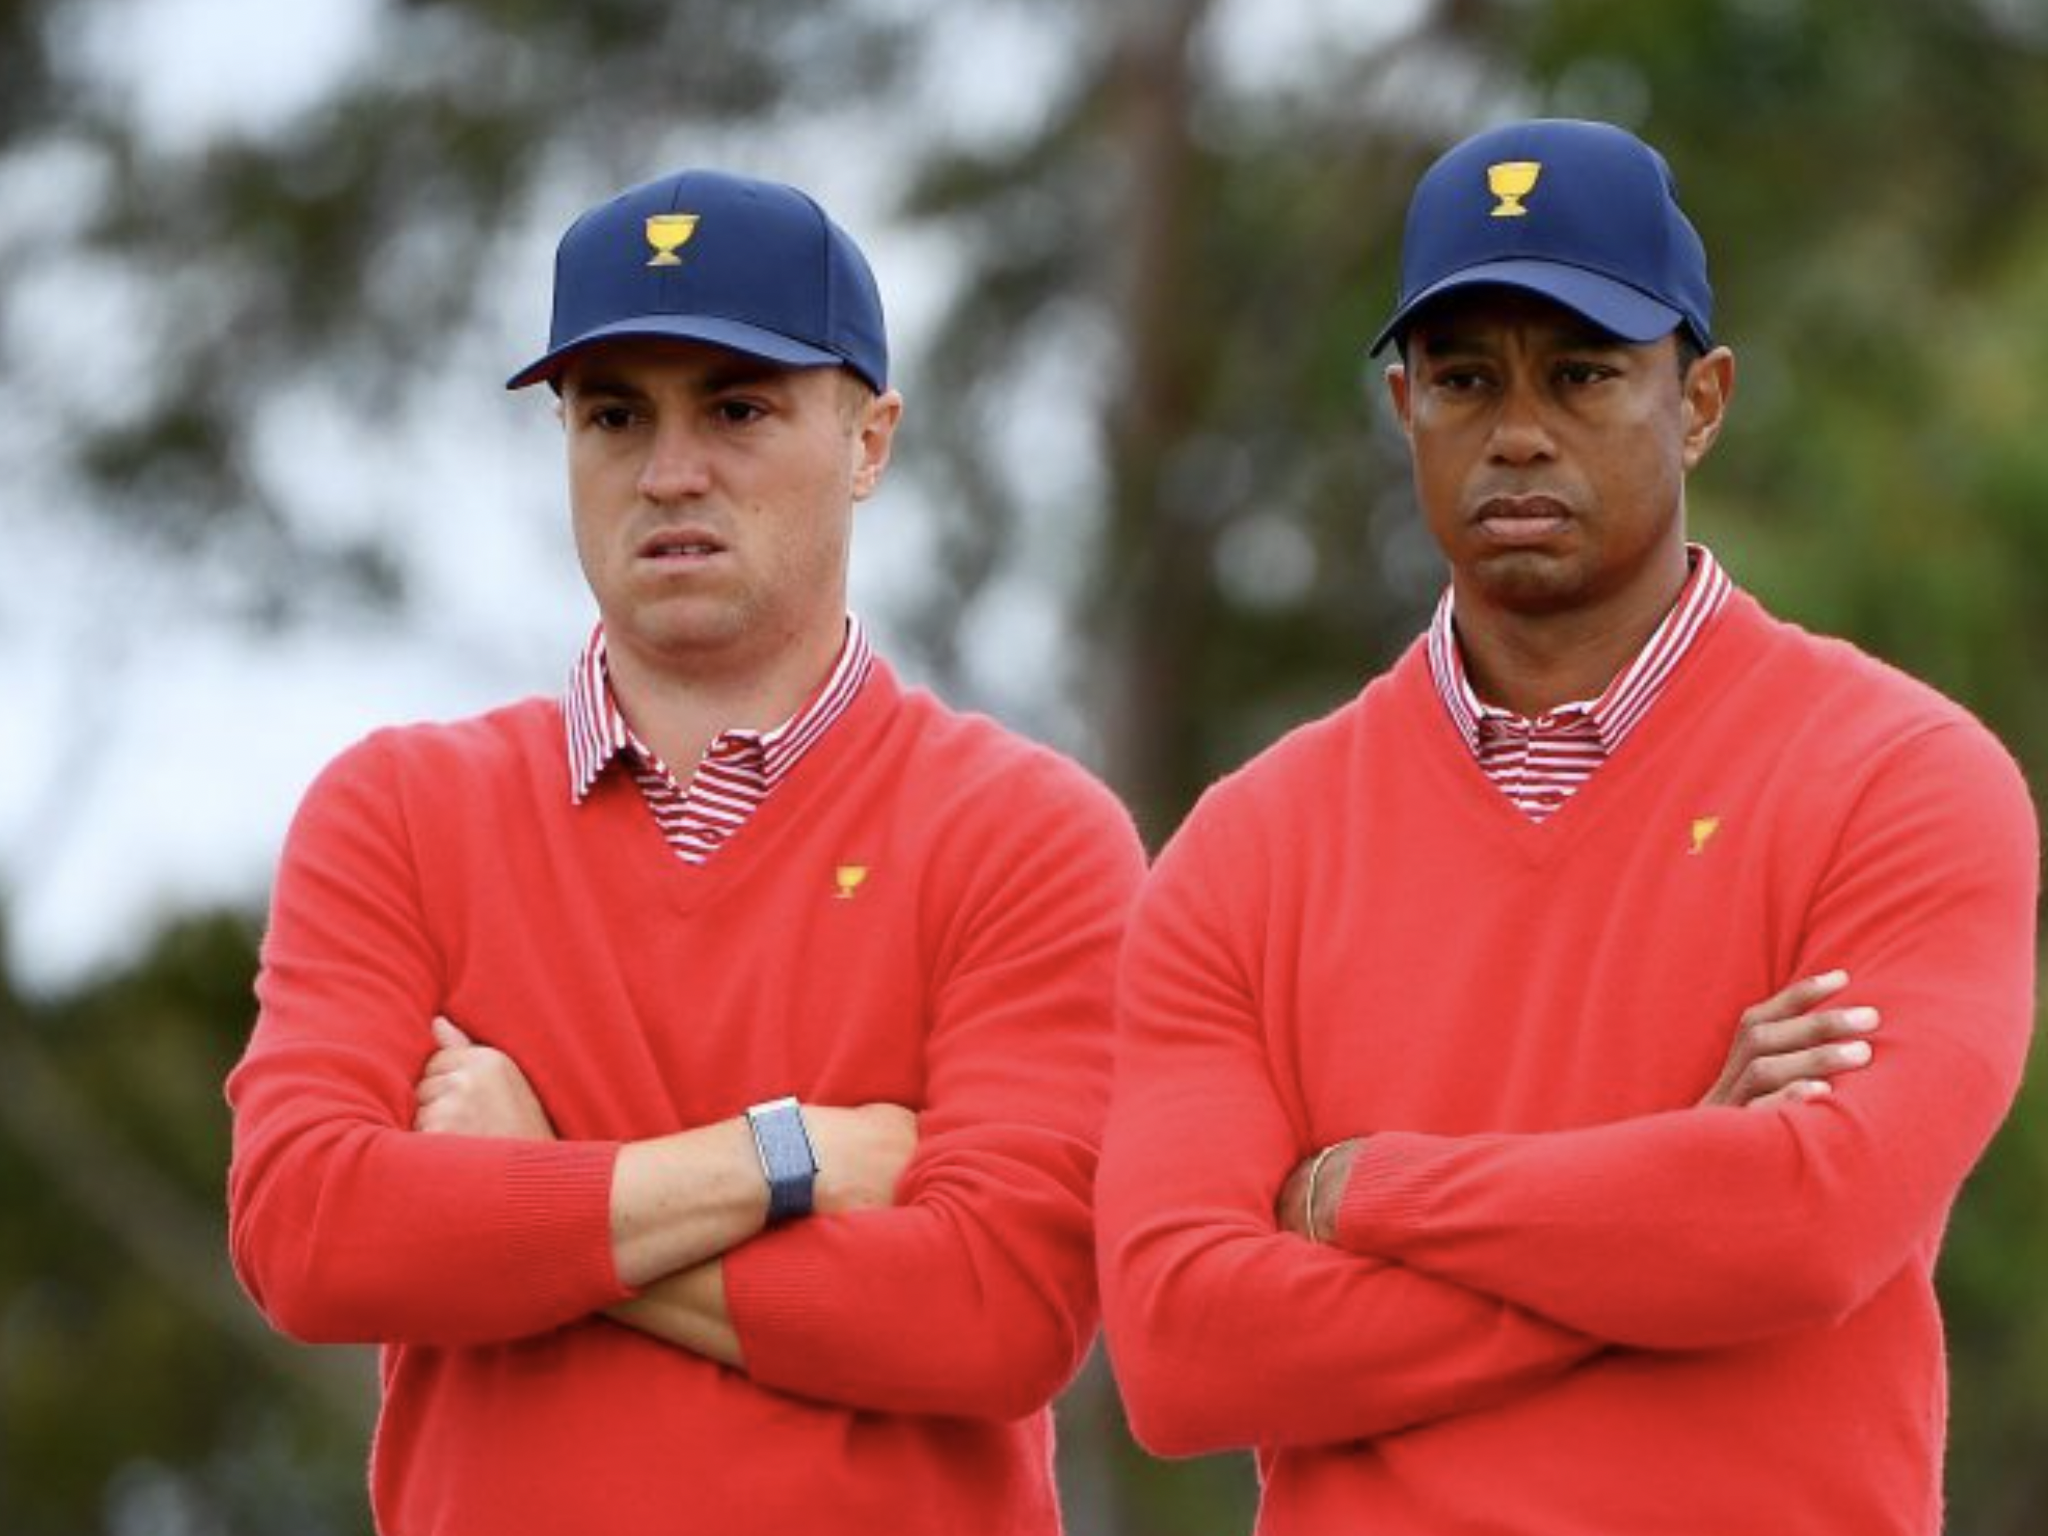 Justin Thomas shares classic story involving Tiger Woods from 2019 Presidents Cup